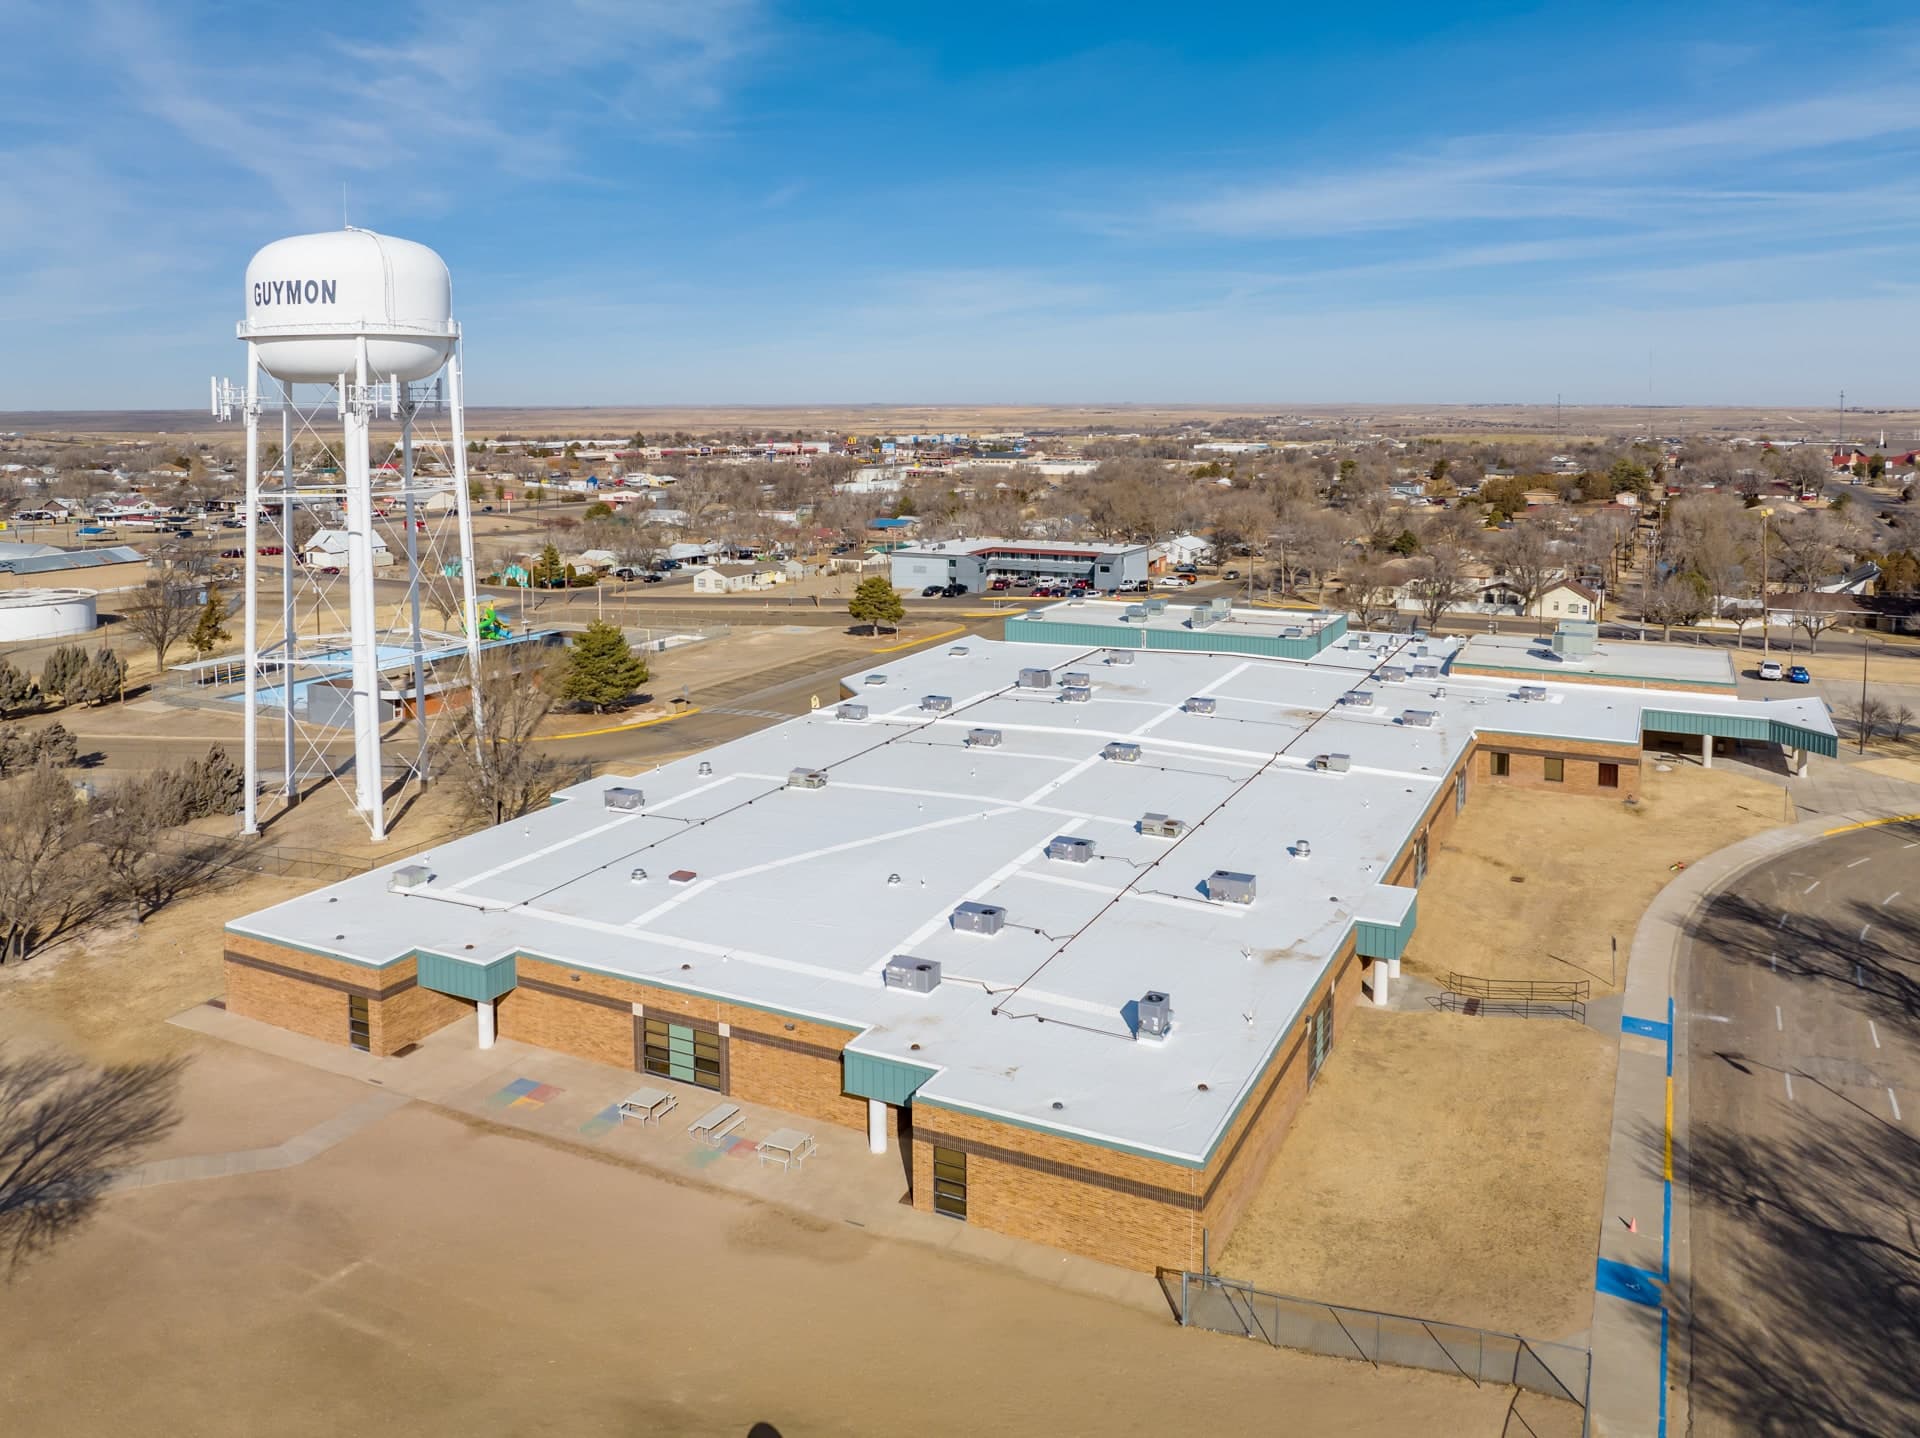 Guymon North Park AFTER DJI 00871 HDR